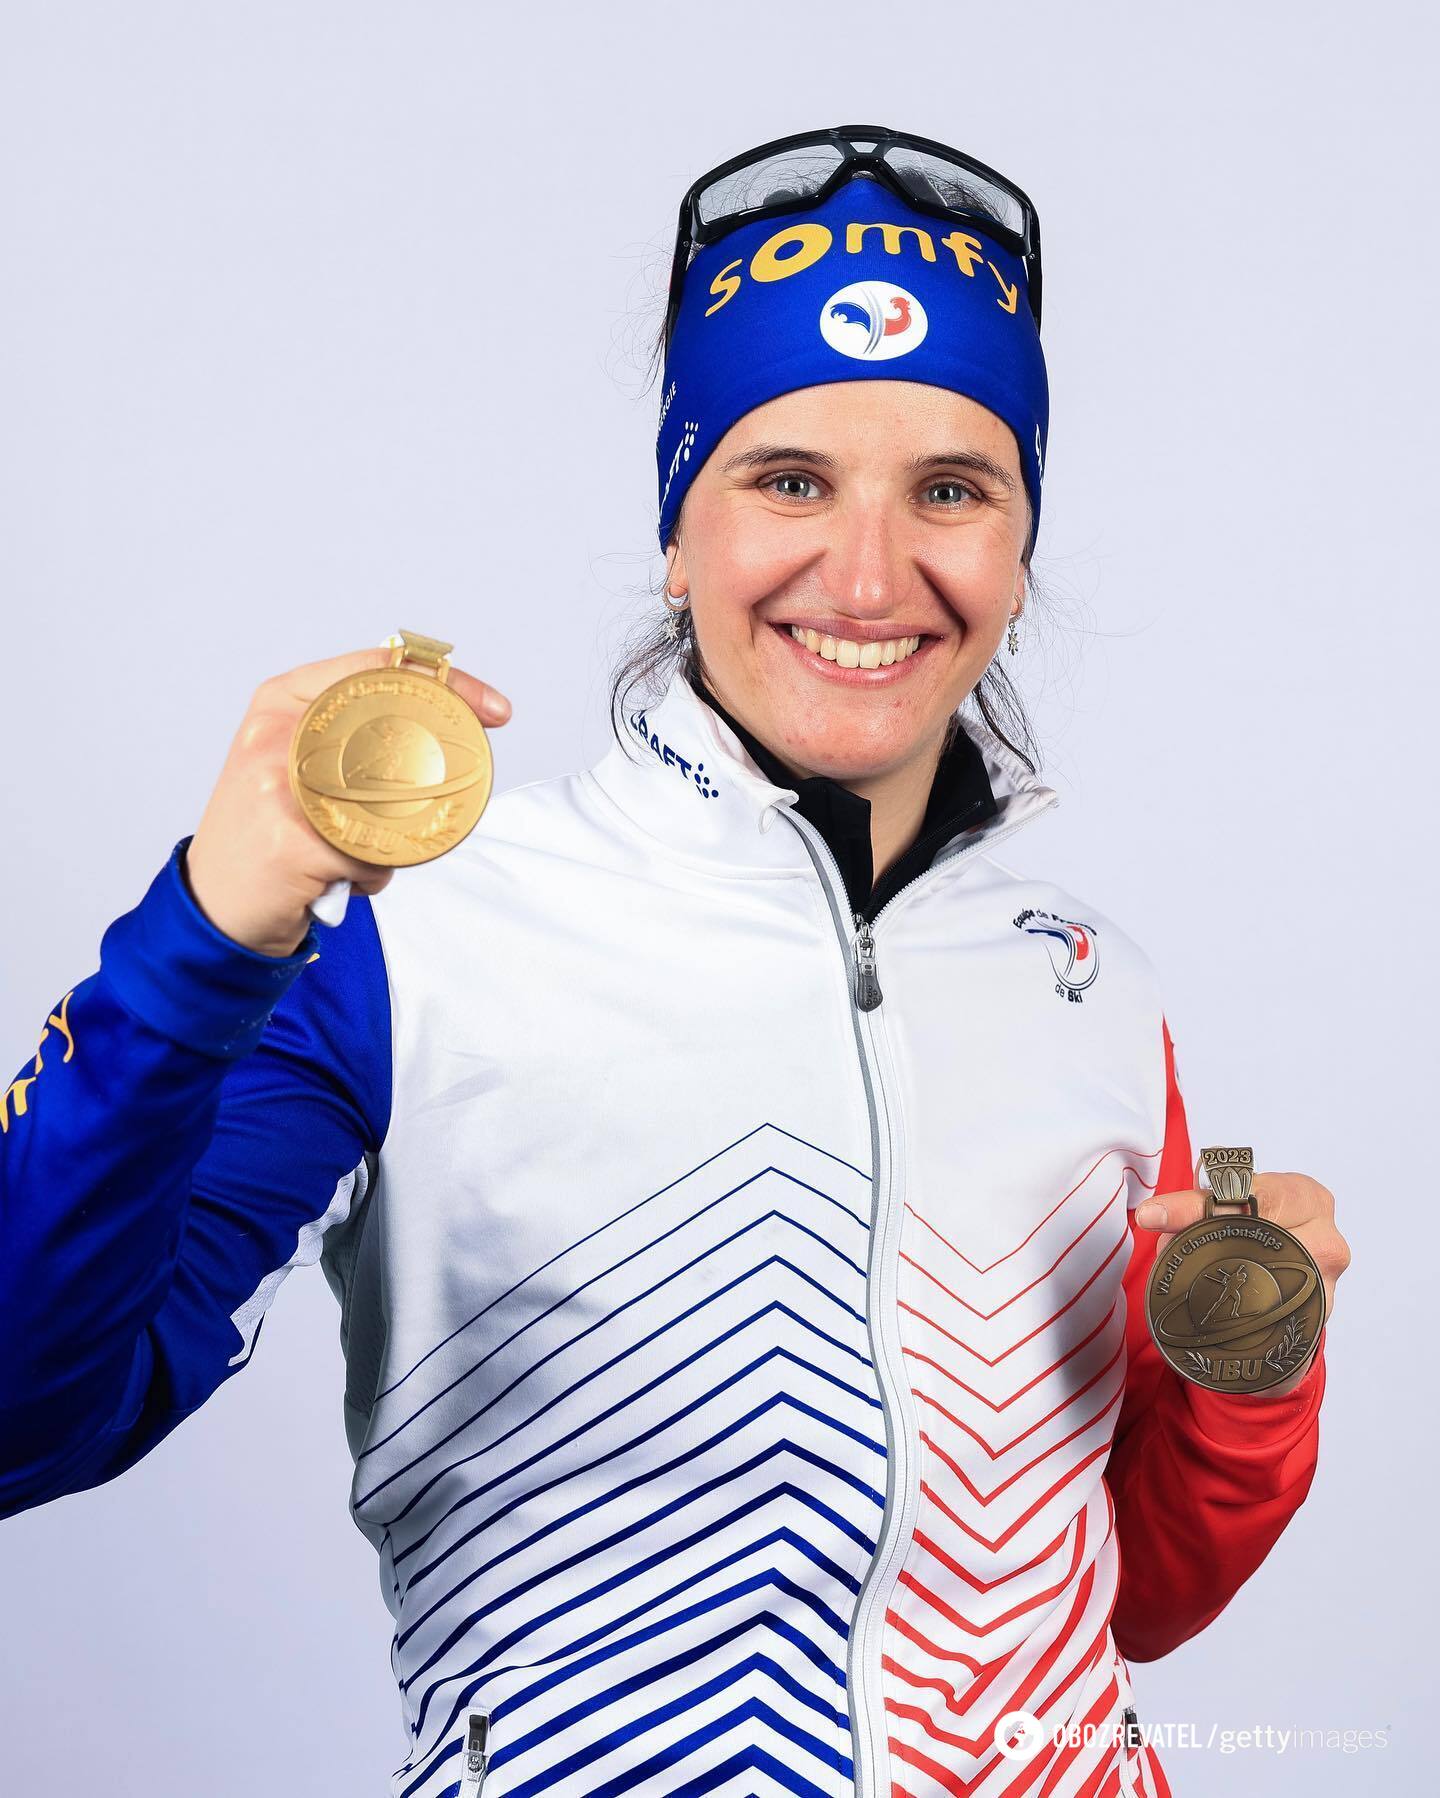 The best biathlete in the world has been arrested. Details of the grand scandal